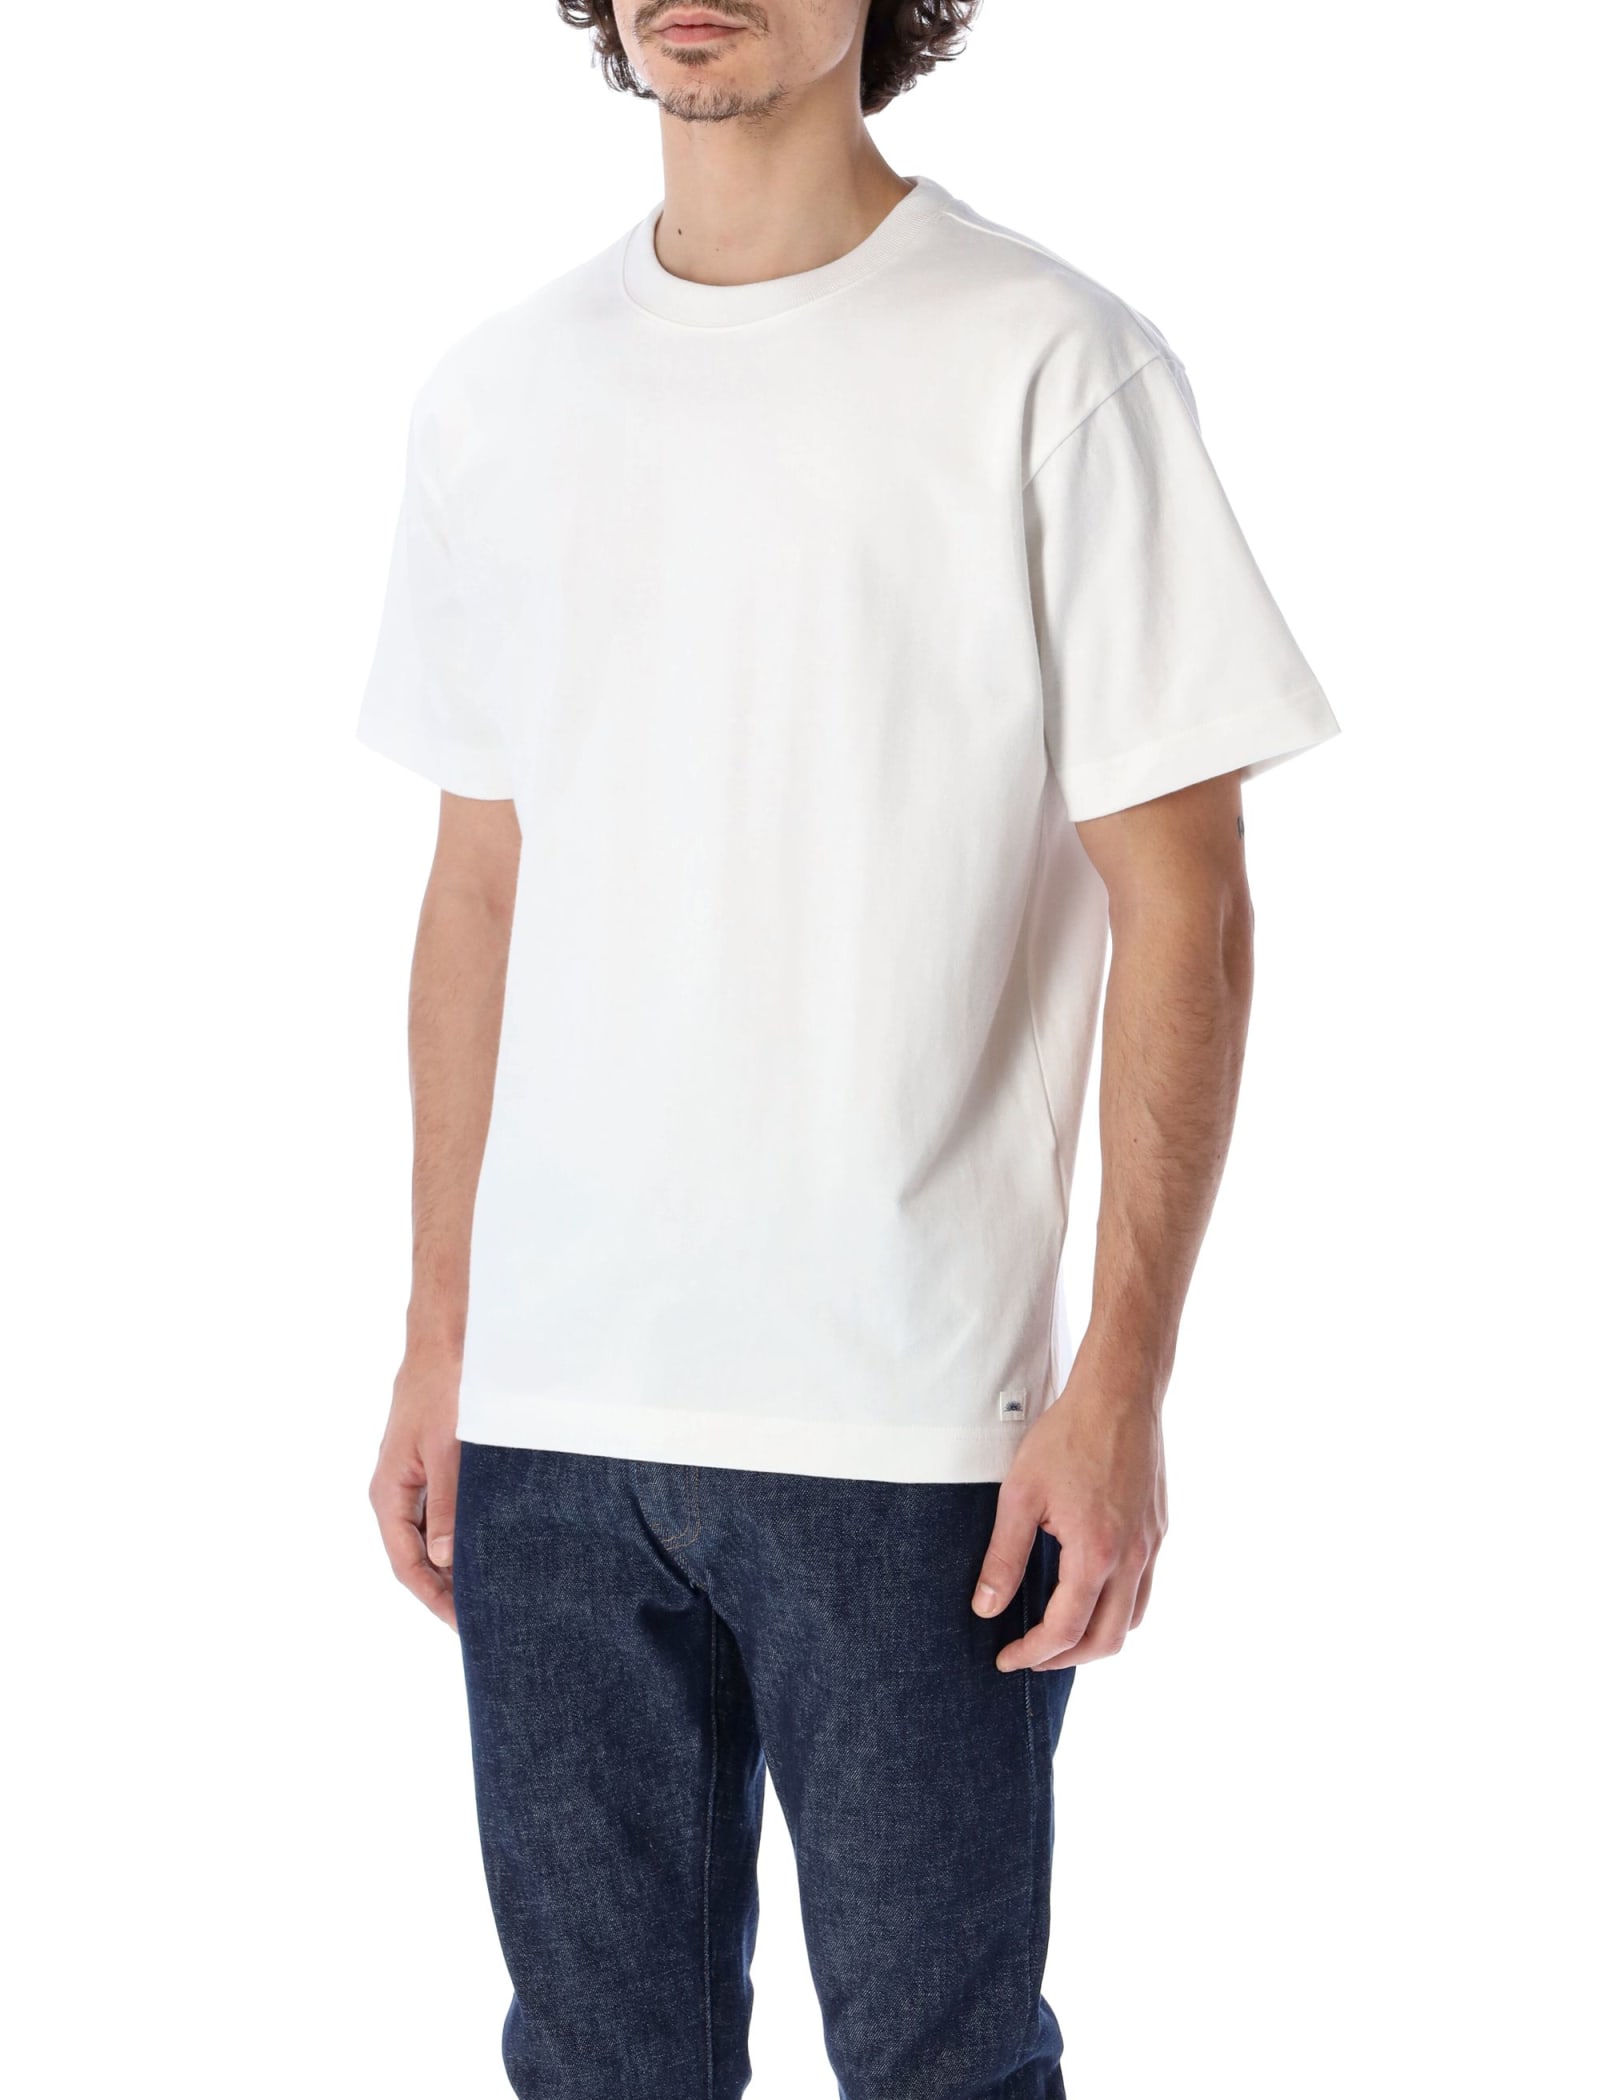 Levis Made & crafted Finished-edge Cotton T-shirt